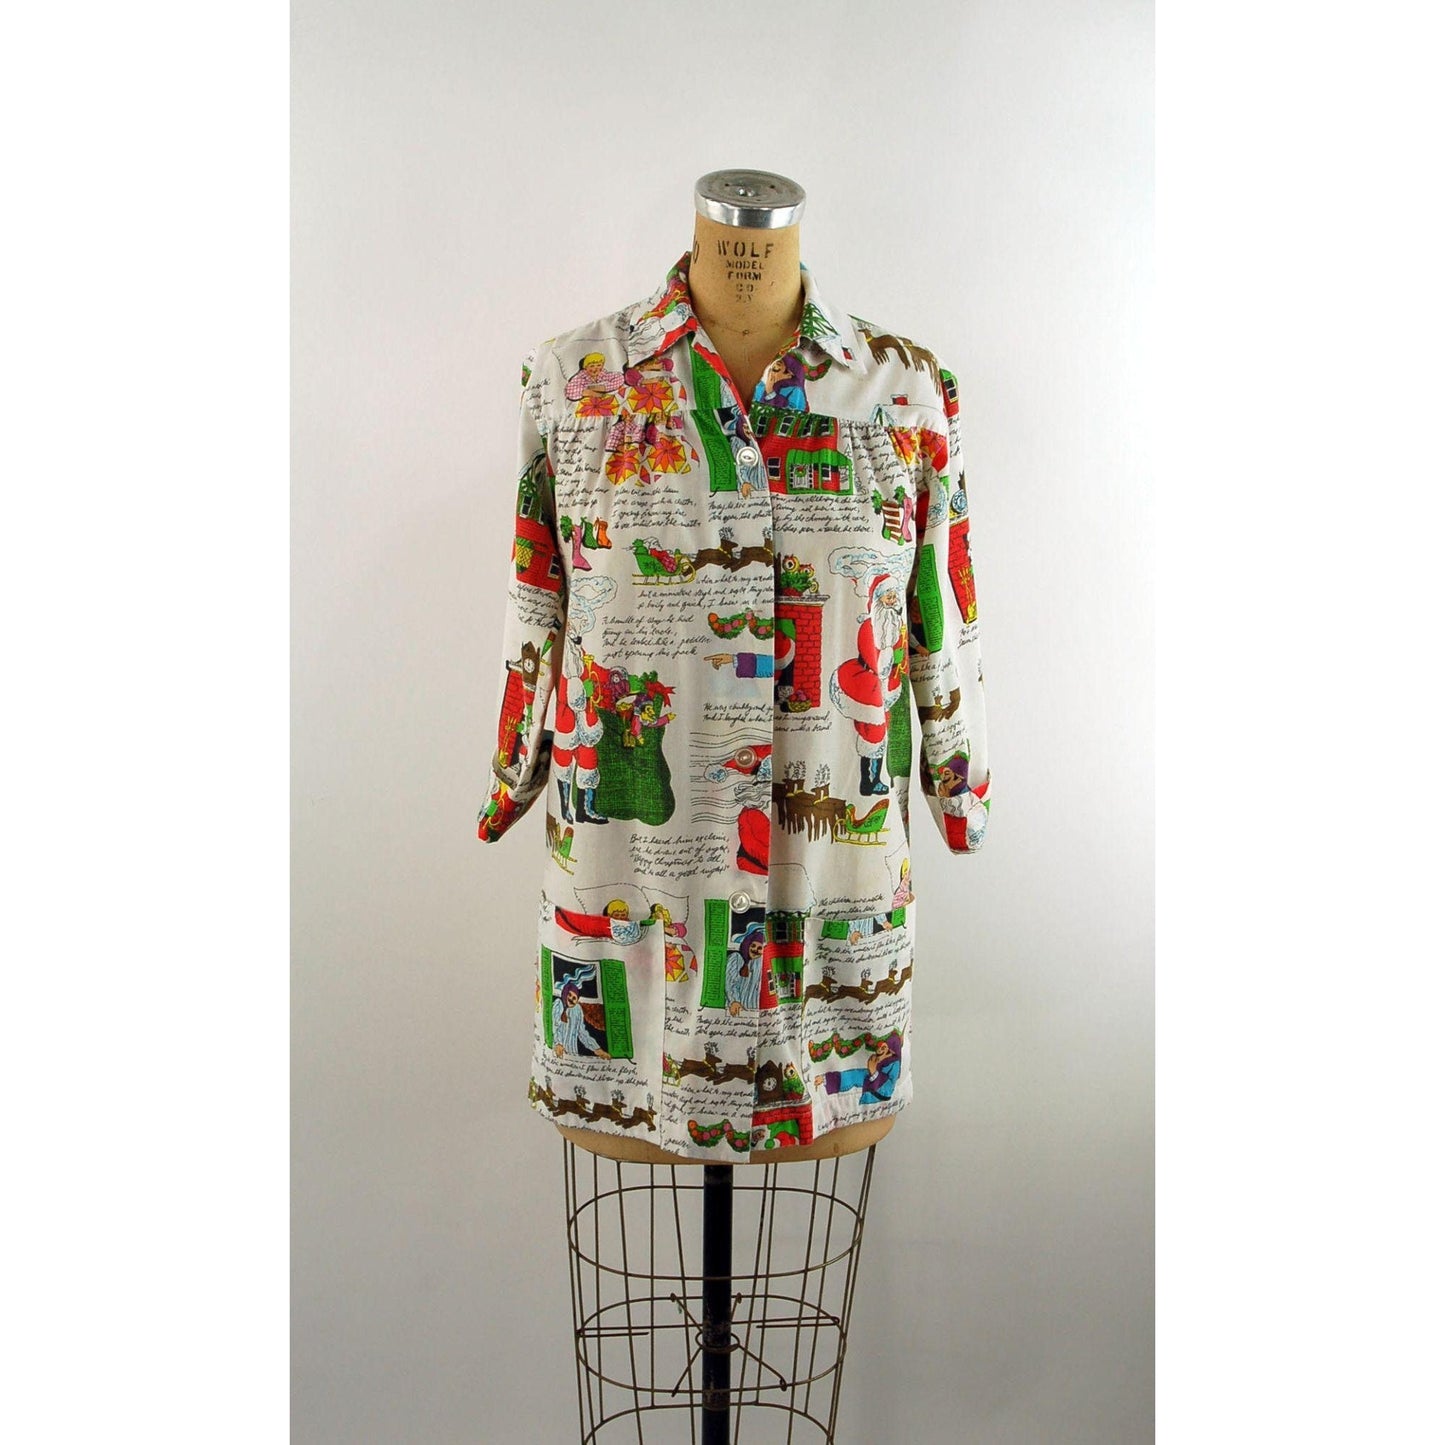 Novelty Christmas smock top shirt Night Before Christmas cartoons by Andhurst Size M